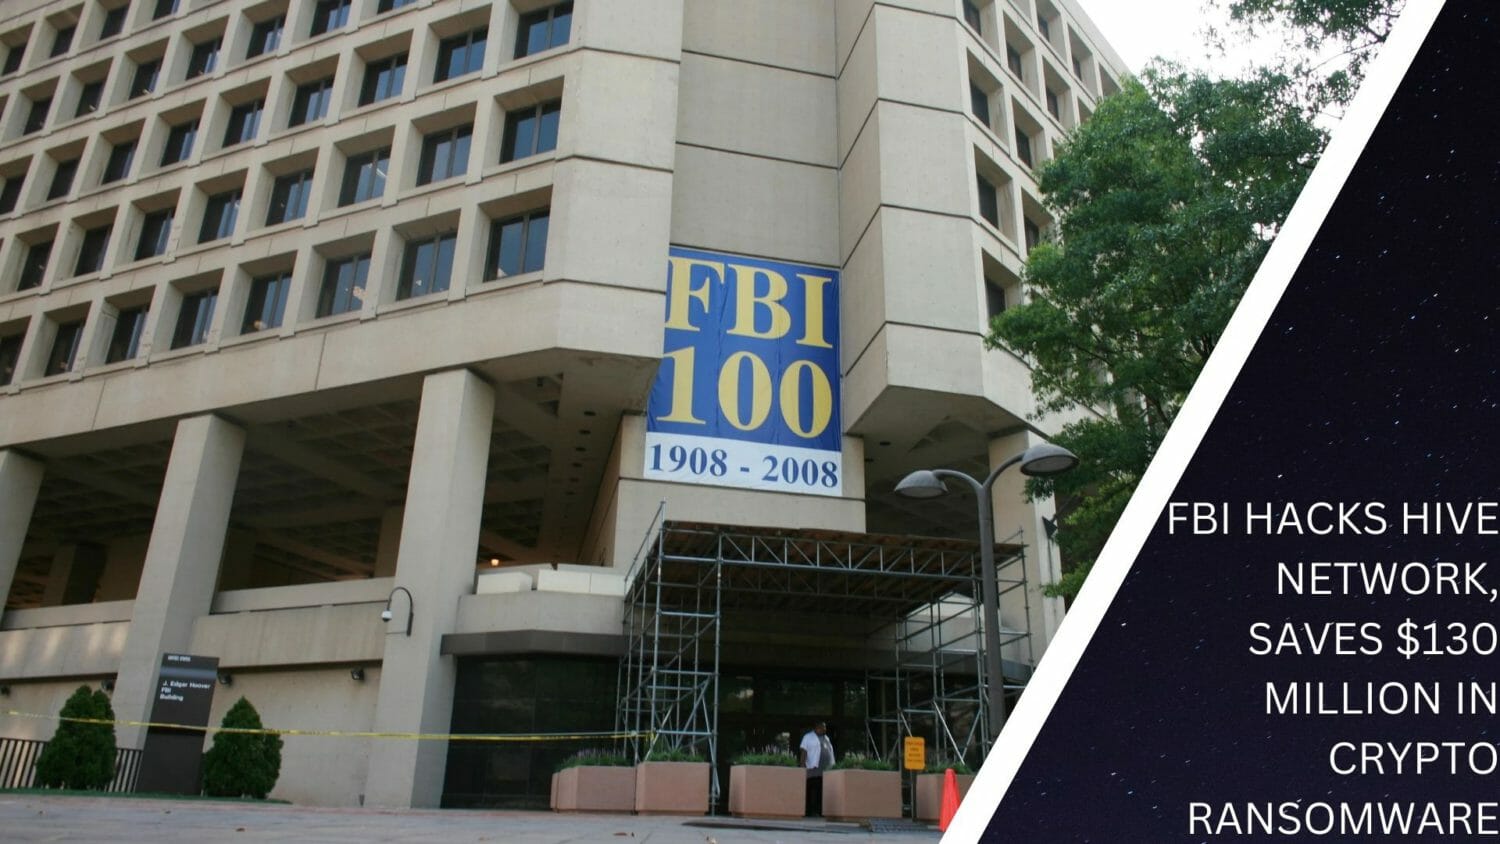 Fbi Hacks Hive Network, Saves $130 Million In Crypto Ransomware